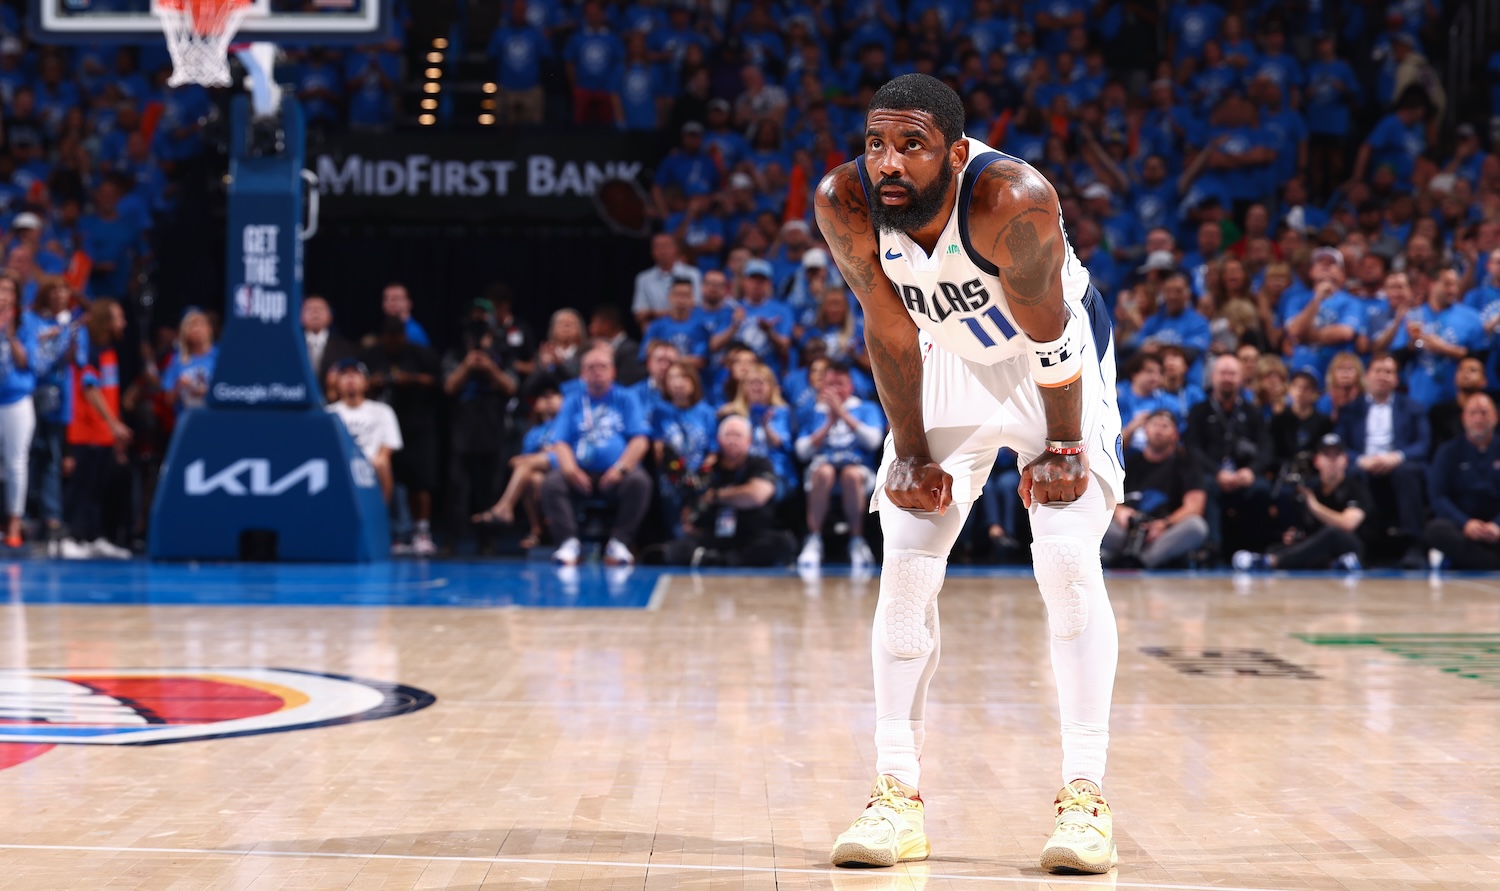 OKLAHOMA CITY, OK - MAY 9: Kyrie Irving #11 of the Dallas Mavericks looks on during the game against the Oklahoma City Thunder during Round Two Game Two of the 2024 NBA Playoffs on May 9, 2024 at Paycom Arena in Oklahoma City, Oklahoma. NOTE TO USER: User expressly acknowledges and agrees that, by downloading and or using this photograph, User is consenting to the terms and conditions of the Getty Images License Agreement. Mandatory Copyright Notice: Copyright 2024 NBAE (Photo by Zach Beeker/NBAE via Getty Images)